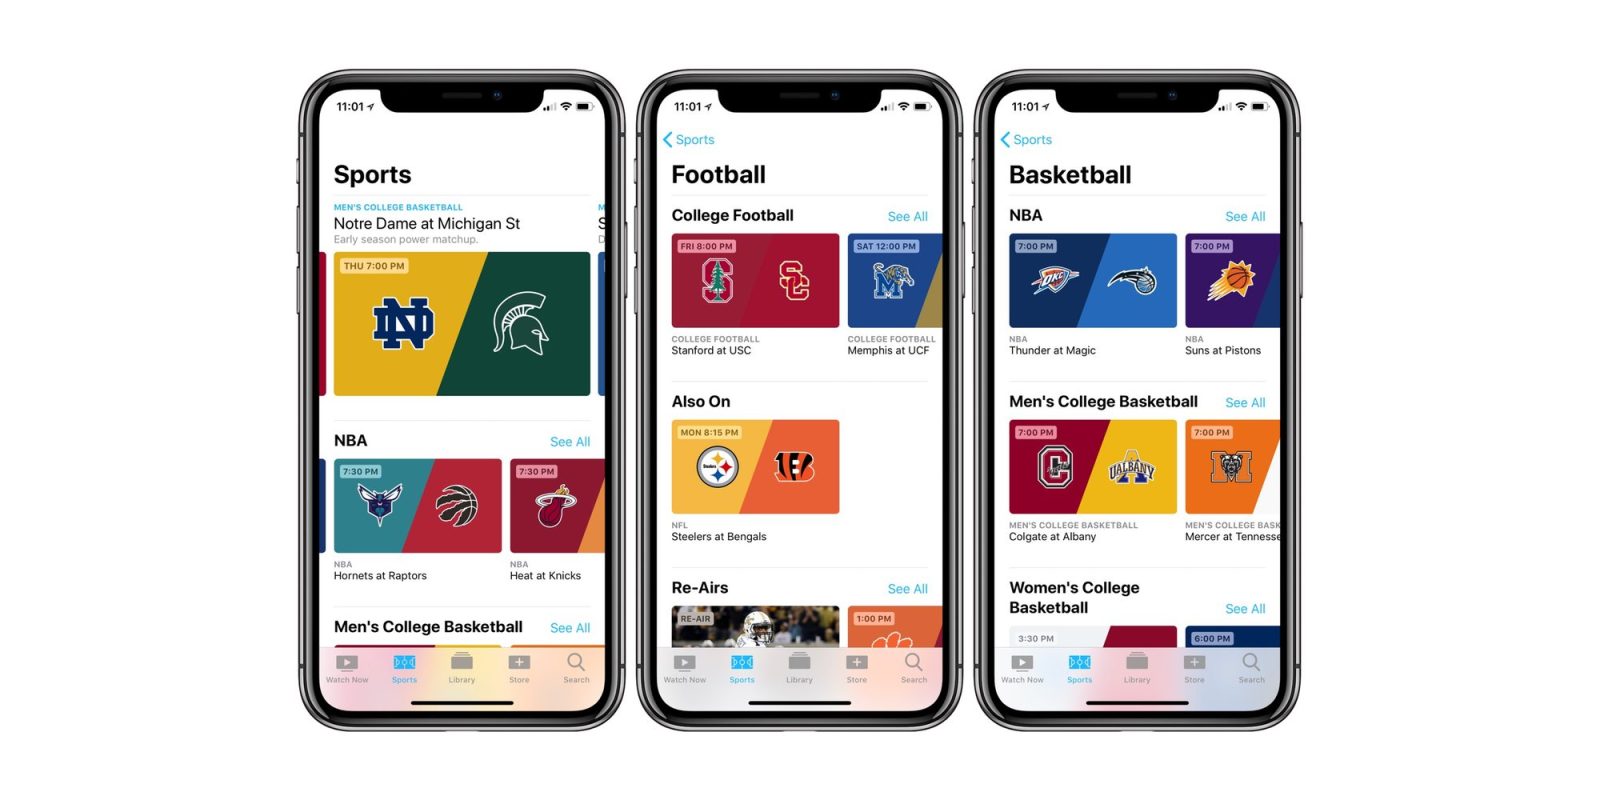 Apple's TV App Sports section